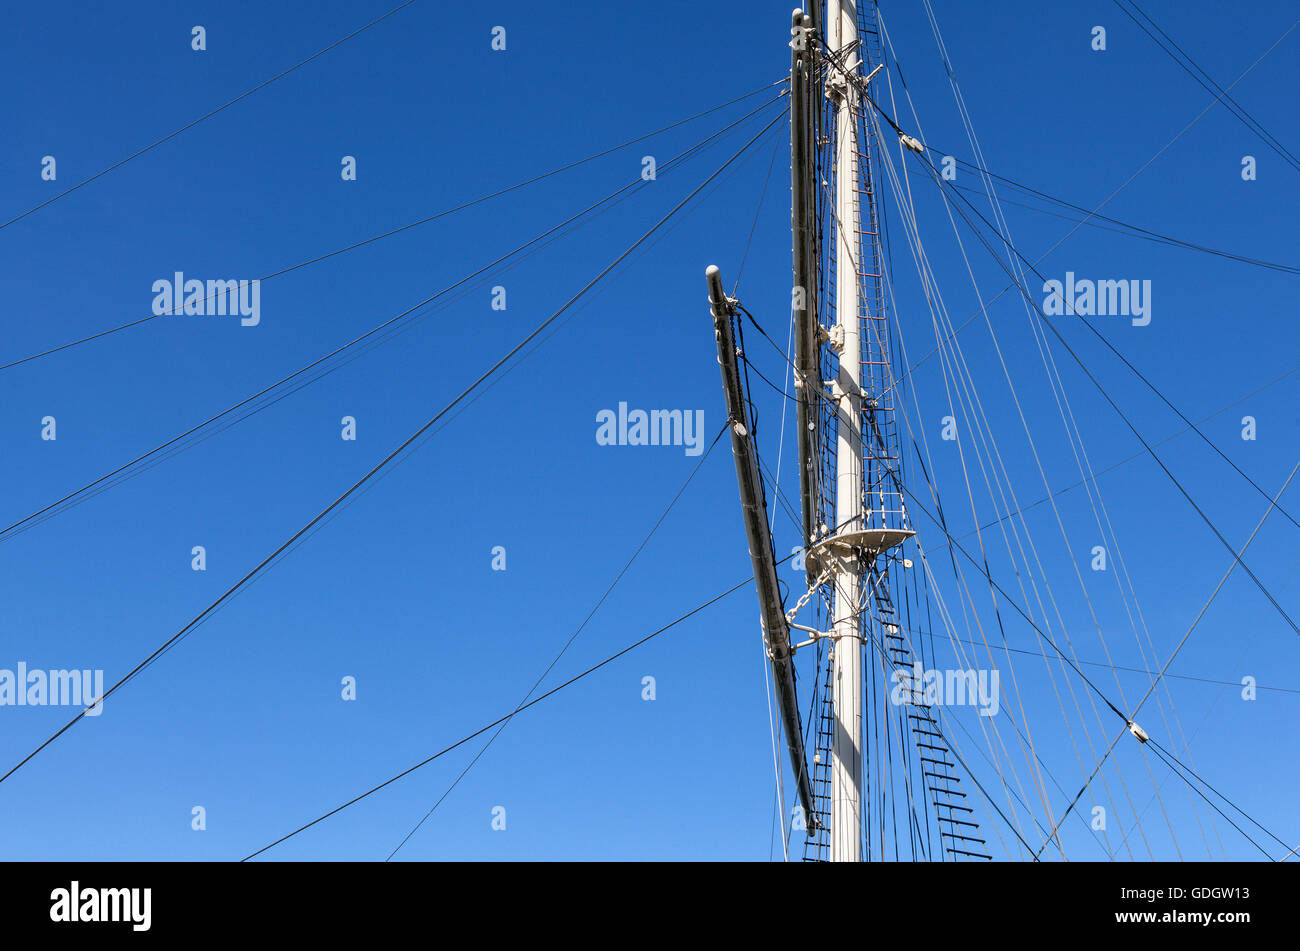 The masts and rigging on a full-rigged ship. Blue sky. Stock Photo